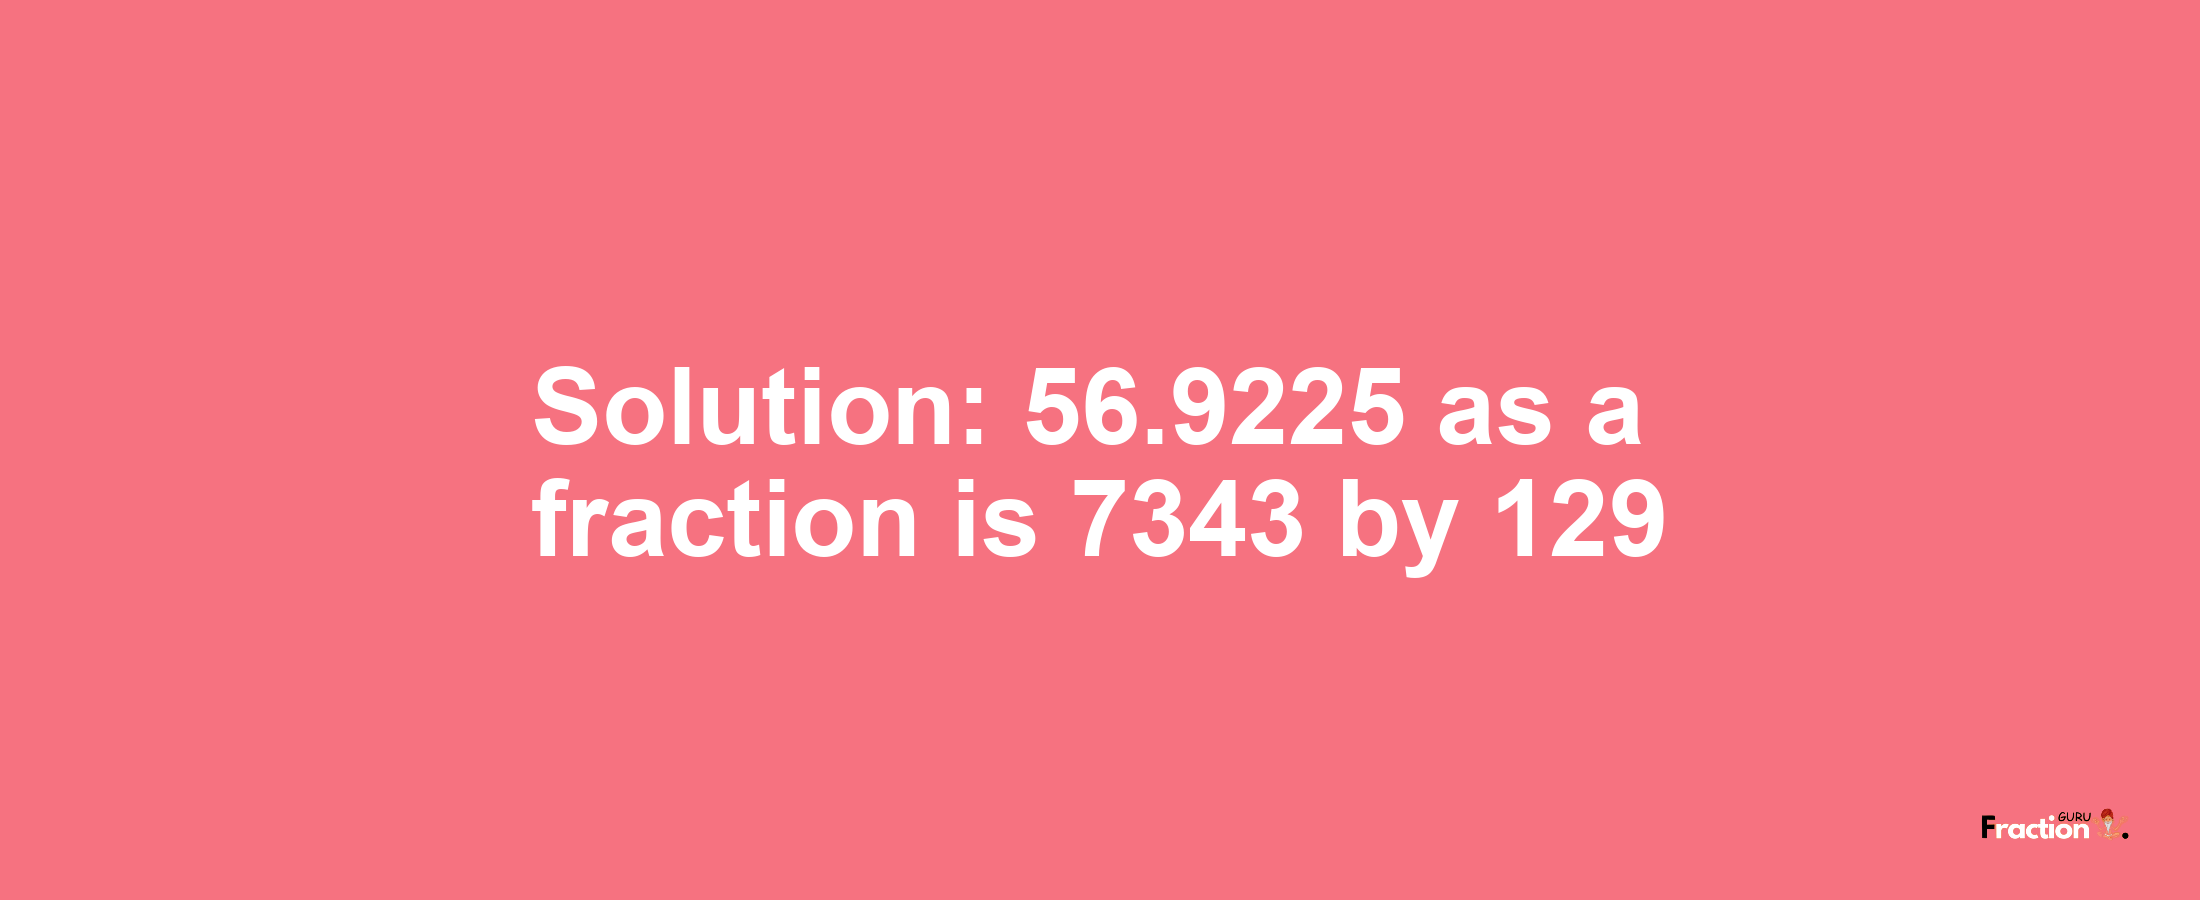 Solution:56.9225 as a fraction is 7343/129